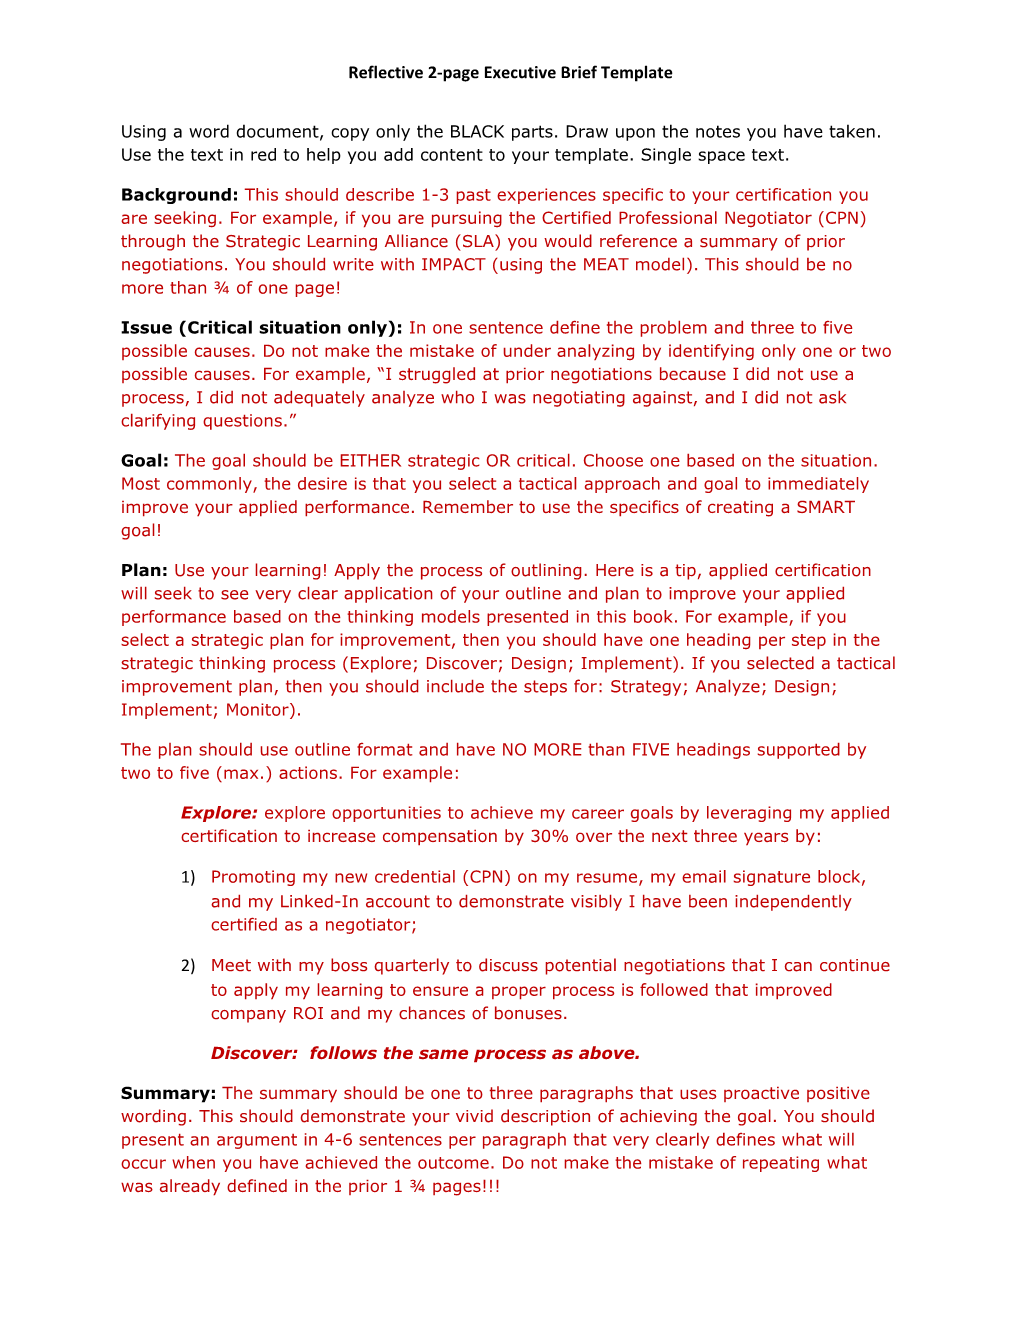 Reflective 2-Page Executive Brief Template